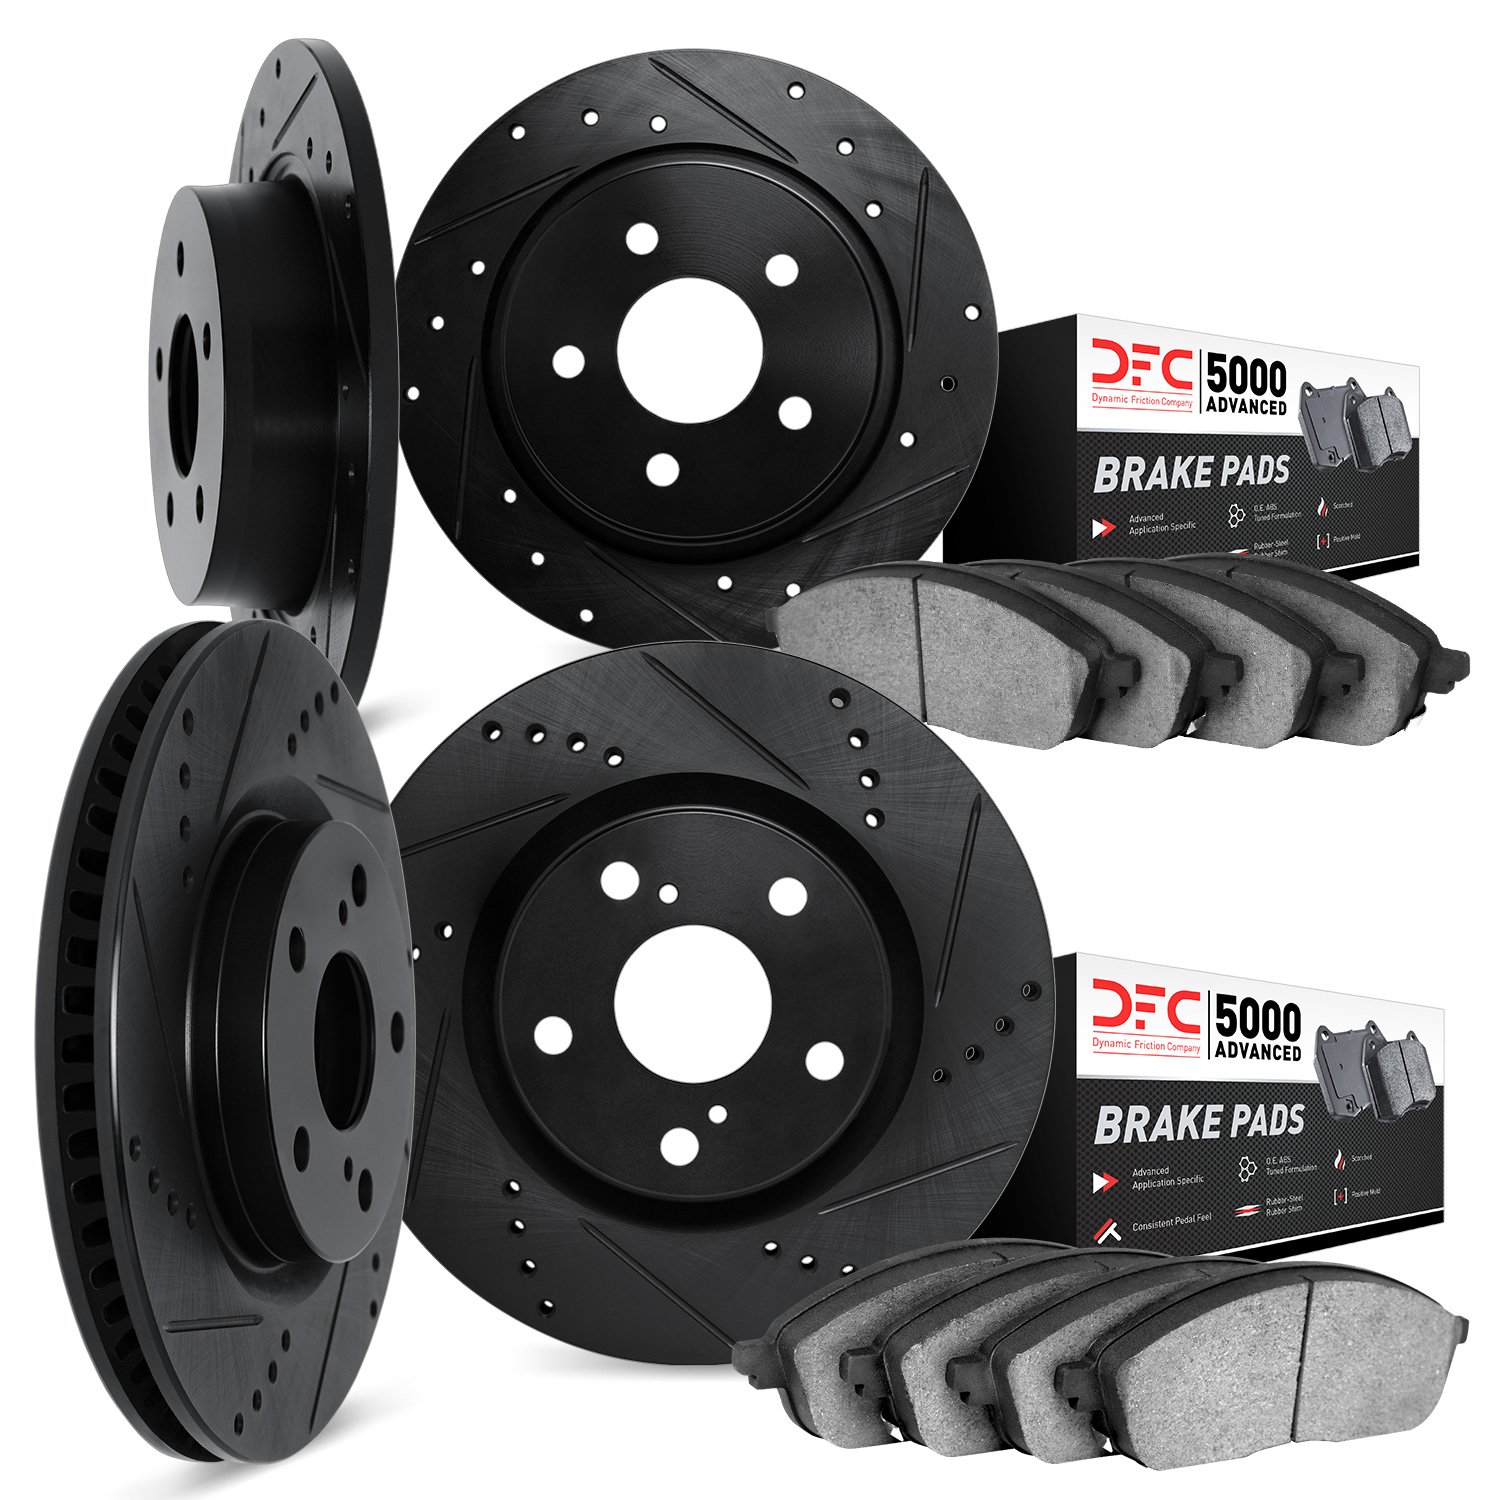 8504-59045 Drilled/Slotted Brake Rotors w/5000 Advanced Brake Pads Kit [Black], 2016-2016 Acura/Honda, Position: Front and Rear